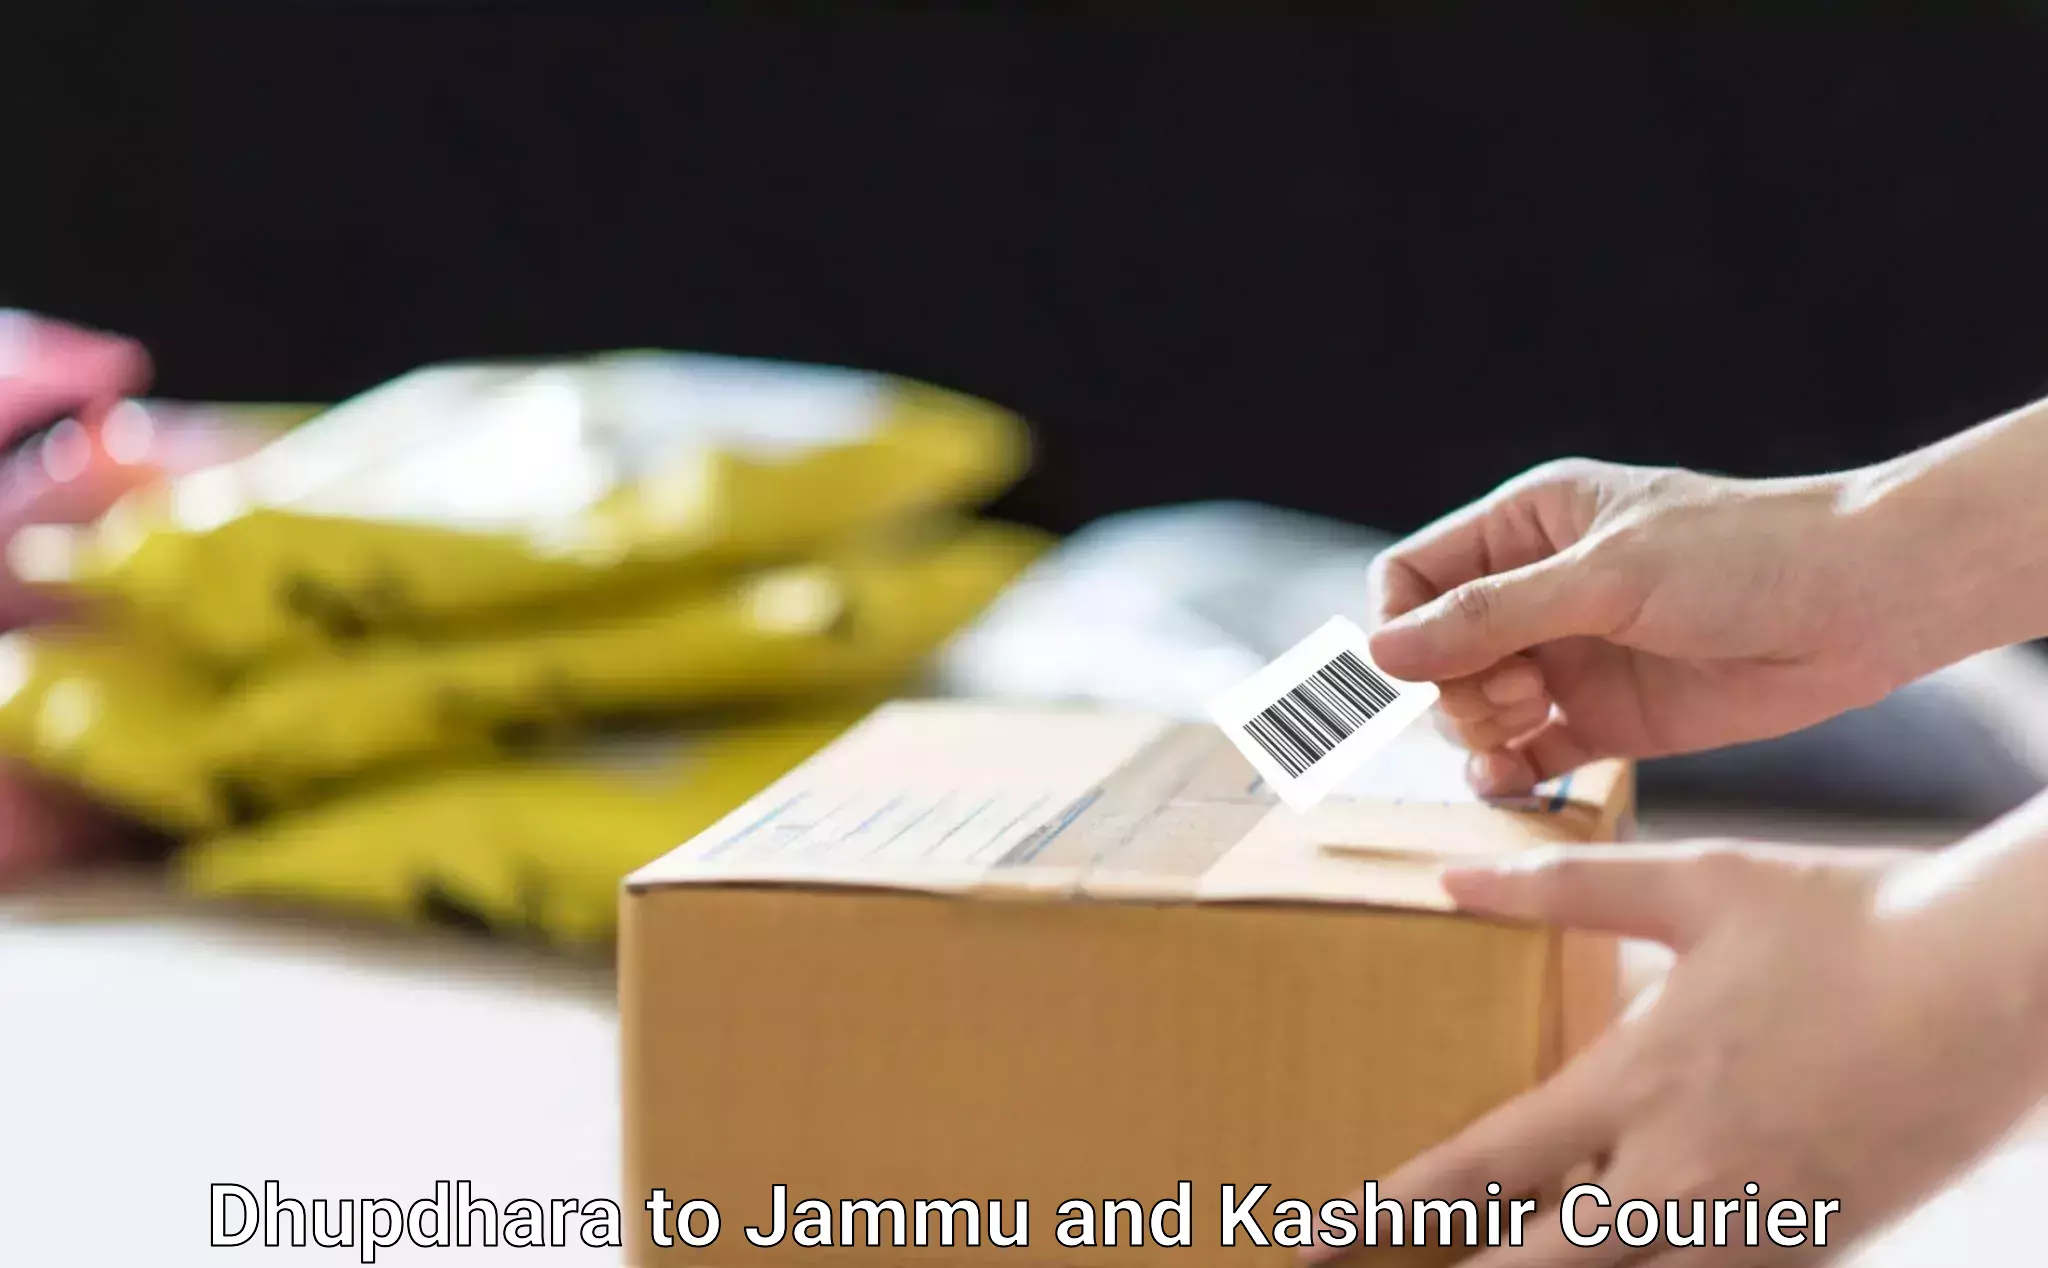 Courier service innovation Dhupdhara to Baramulla